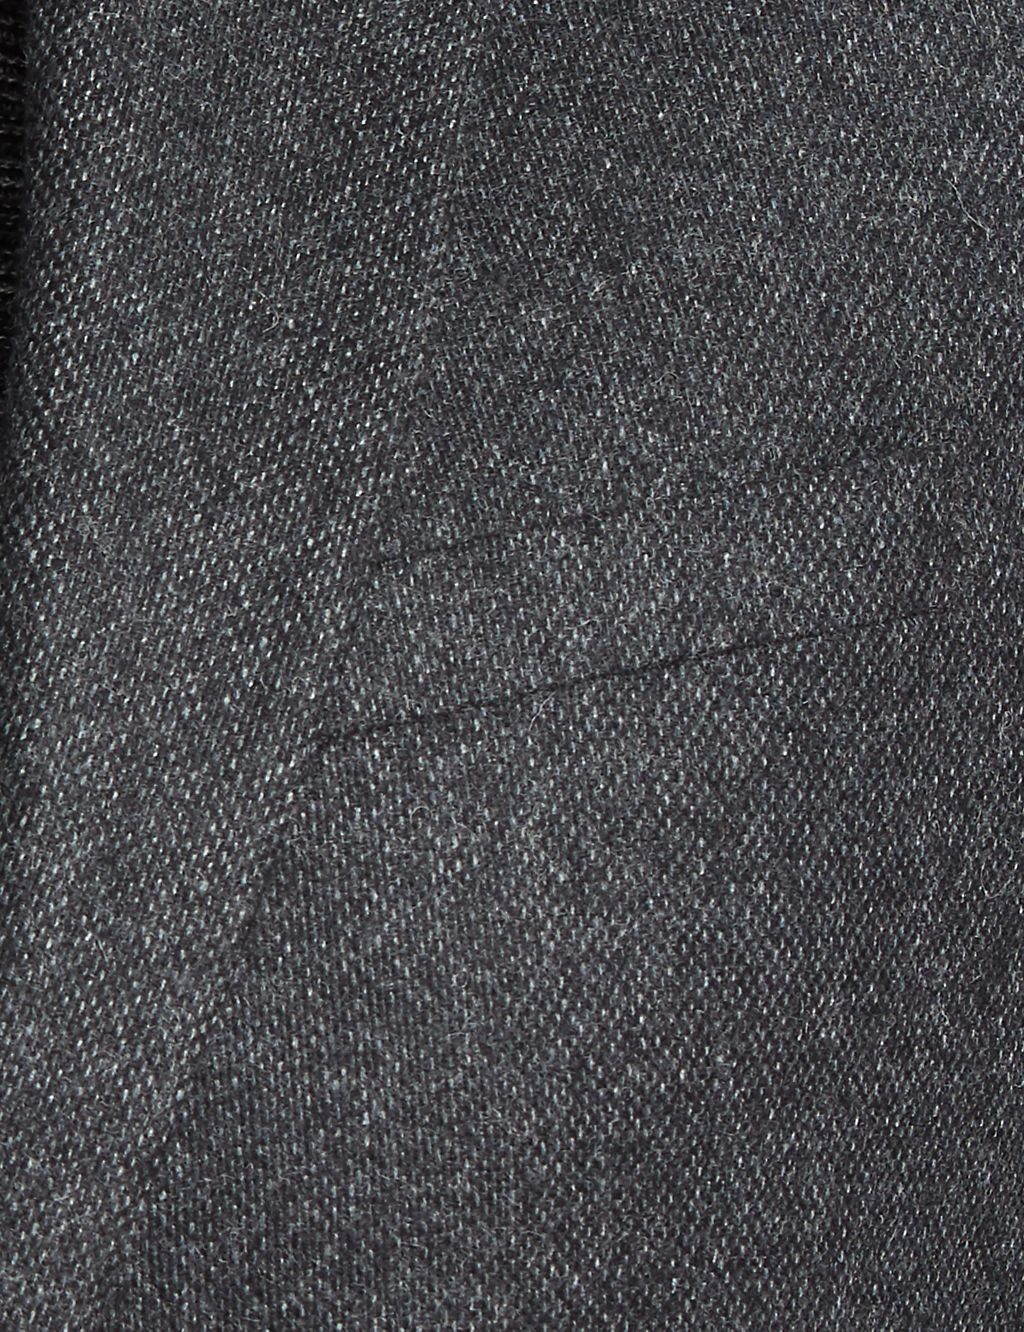 Charcoal Textured Slim Fit Jacket 5 of 9